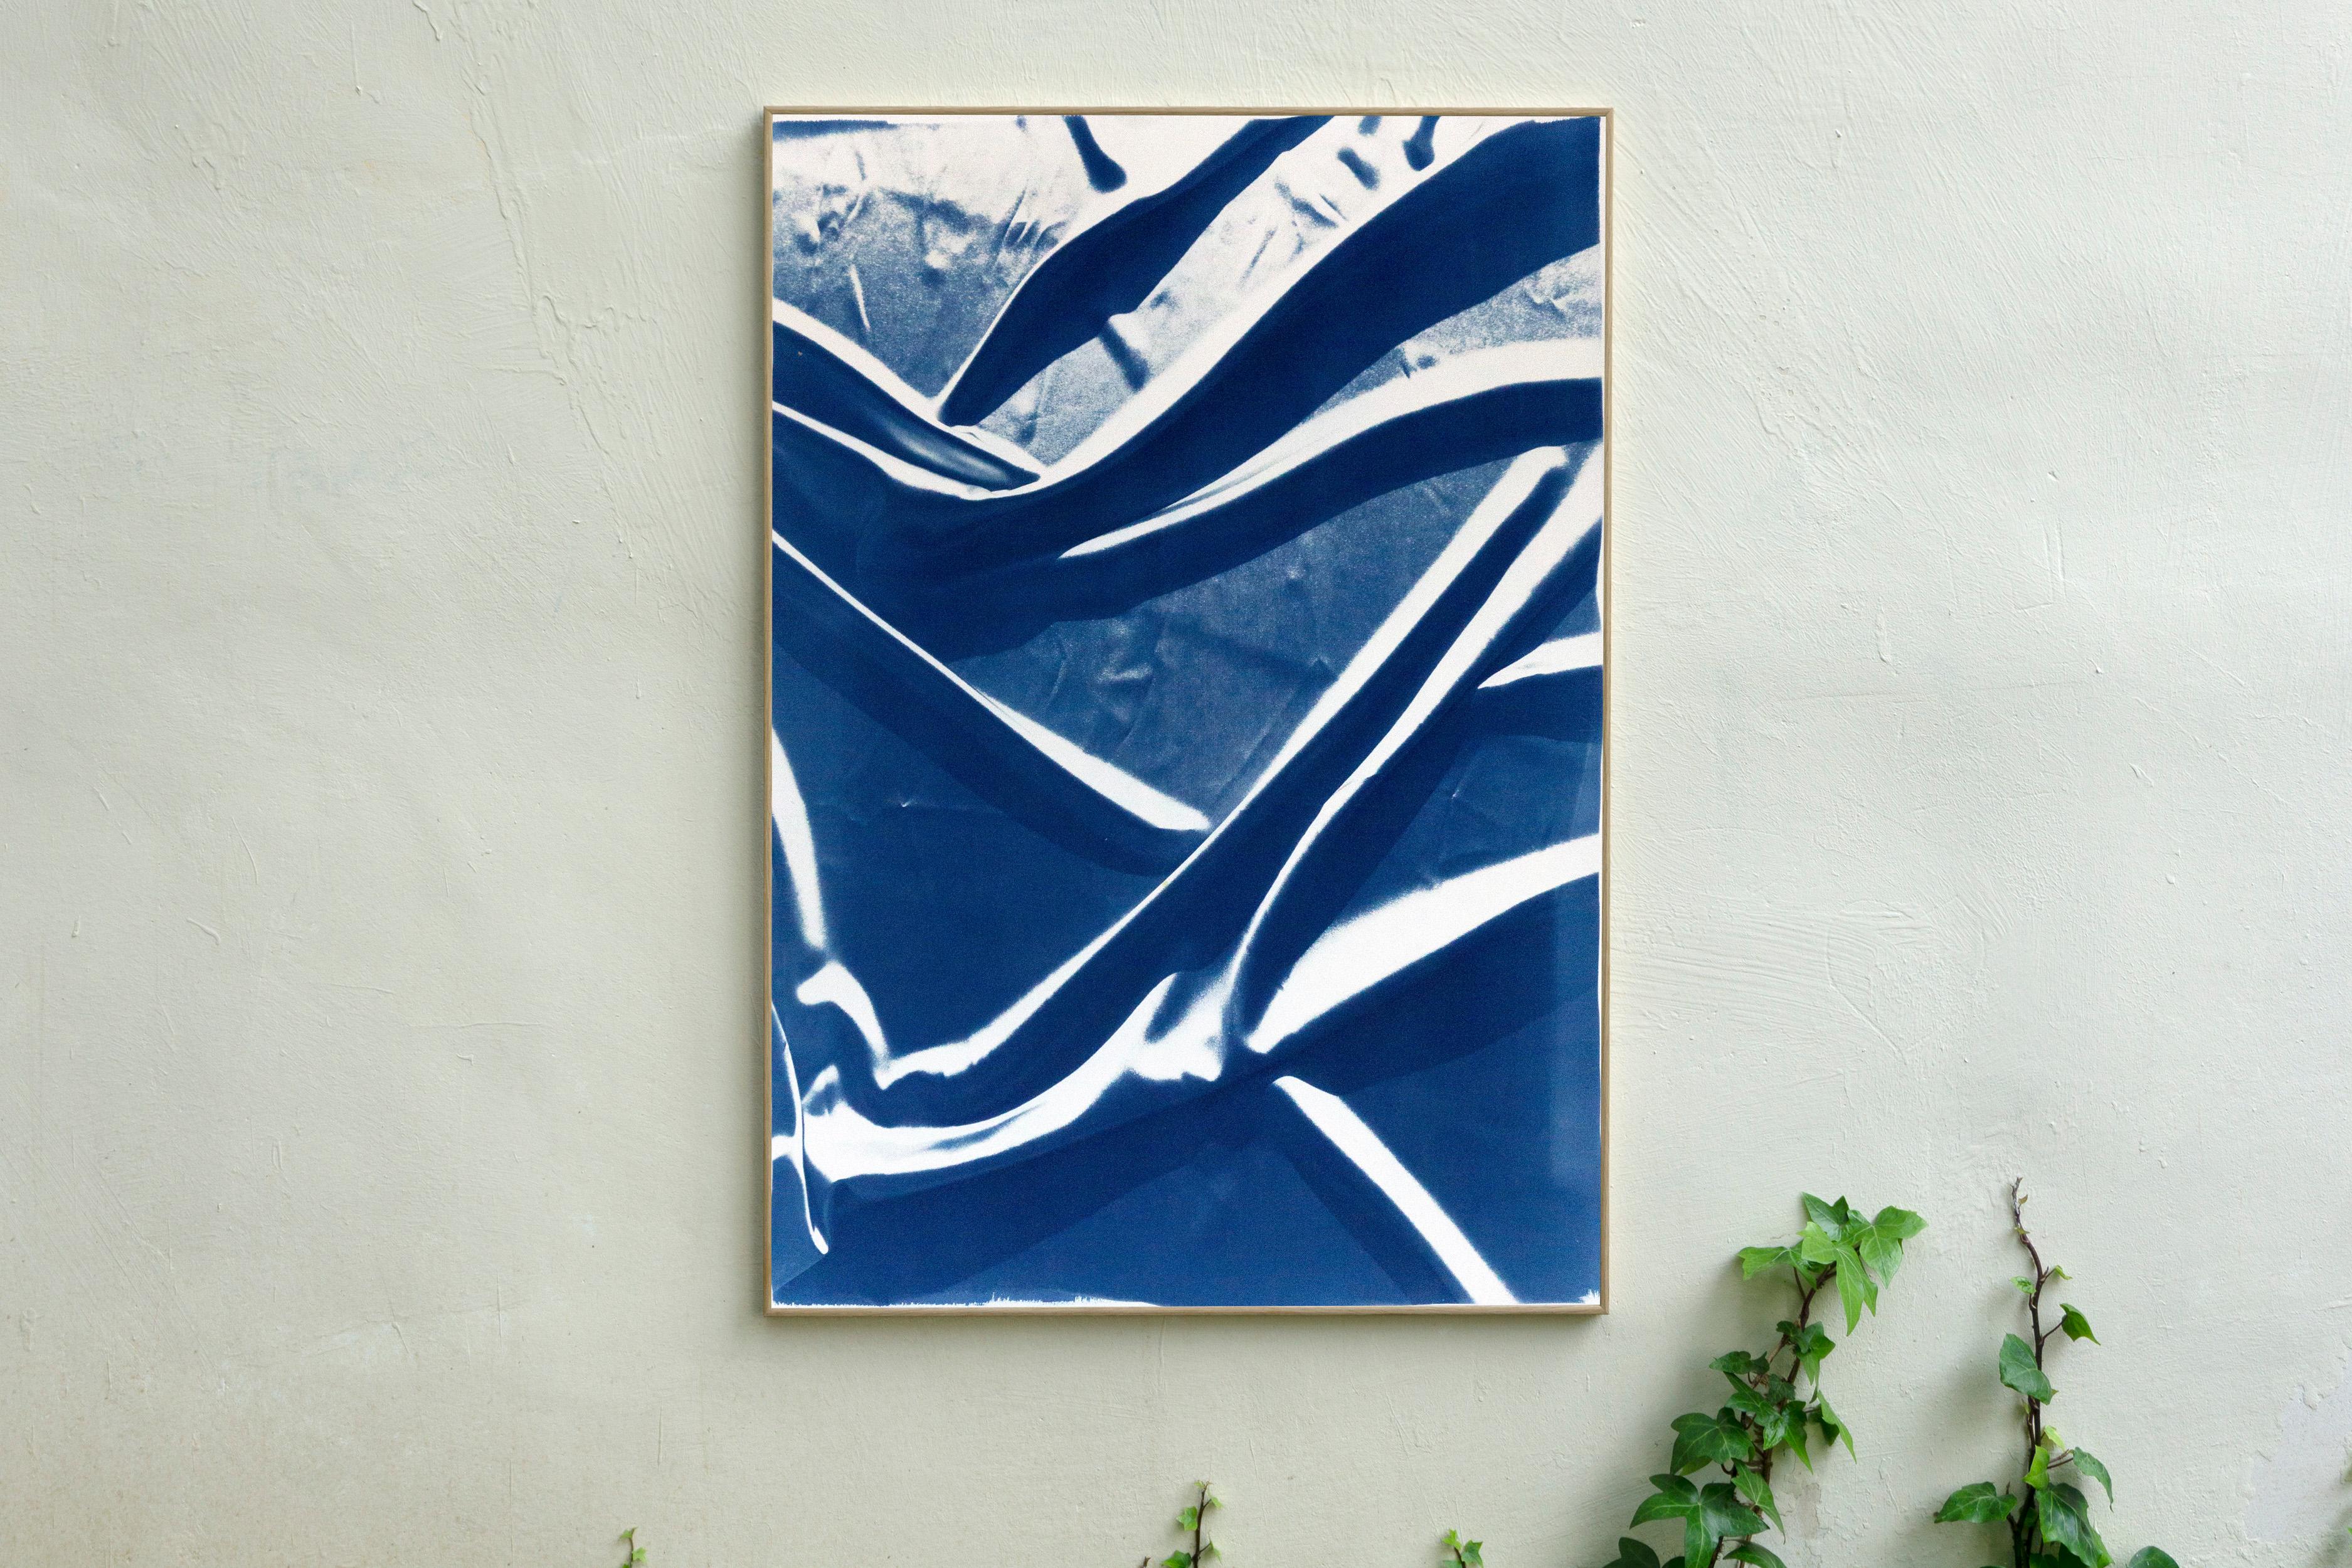 This is an exclusive handprinted limited edition cyanotype.

Details:
+ Title: Classic Blue Silk Movement nº3
+ Year: 2021
+ Edition Size: 50
+ Stamped and Certificate of Authenticity provided
+ Measurements : 70x100 cm (28x 40 in.), a standard